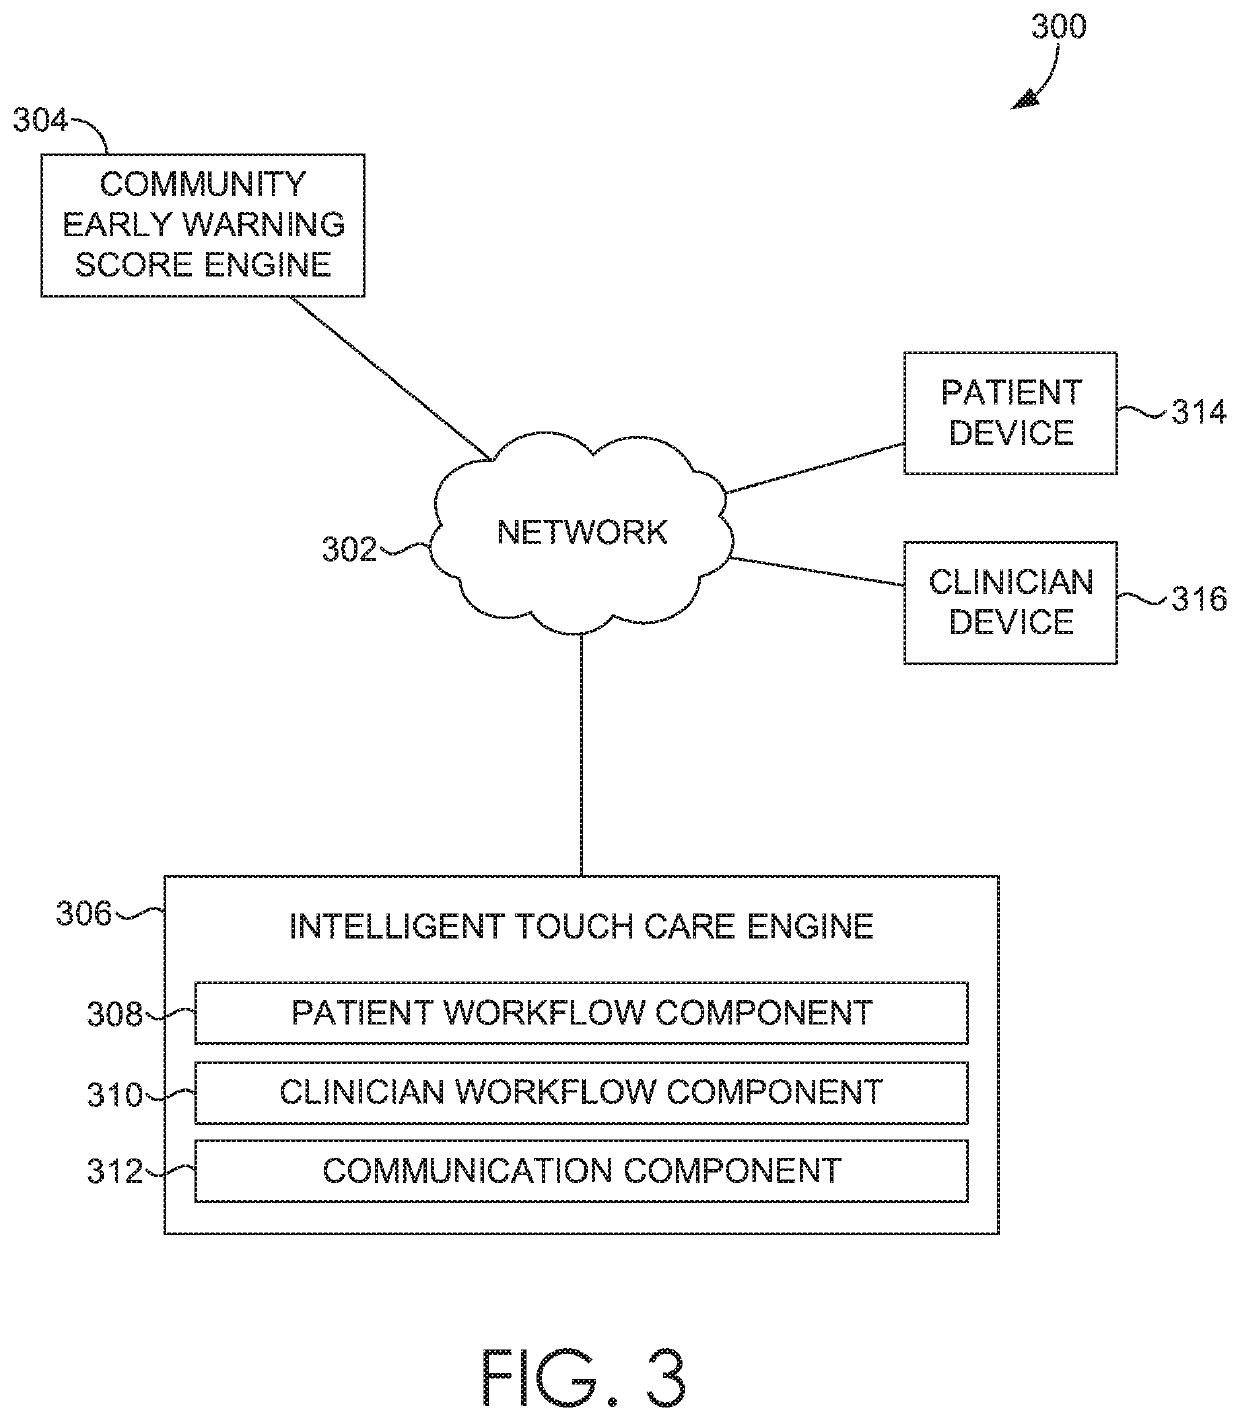 Intelligent touch care corresponding to a scheduled clinician visit